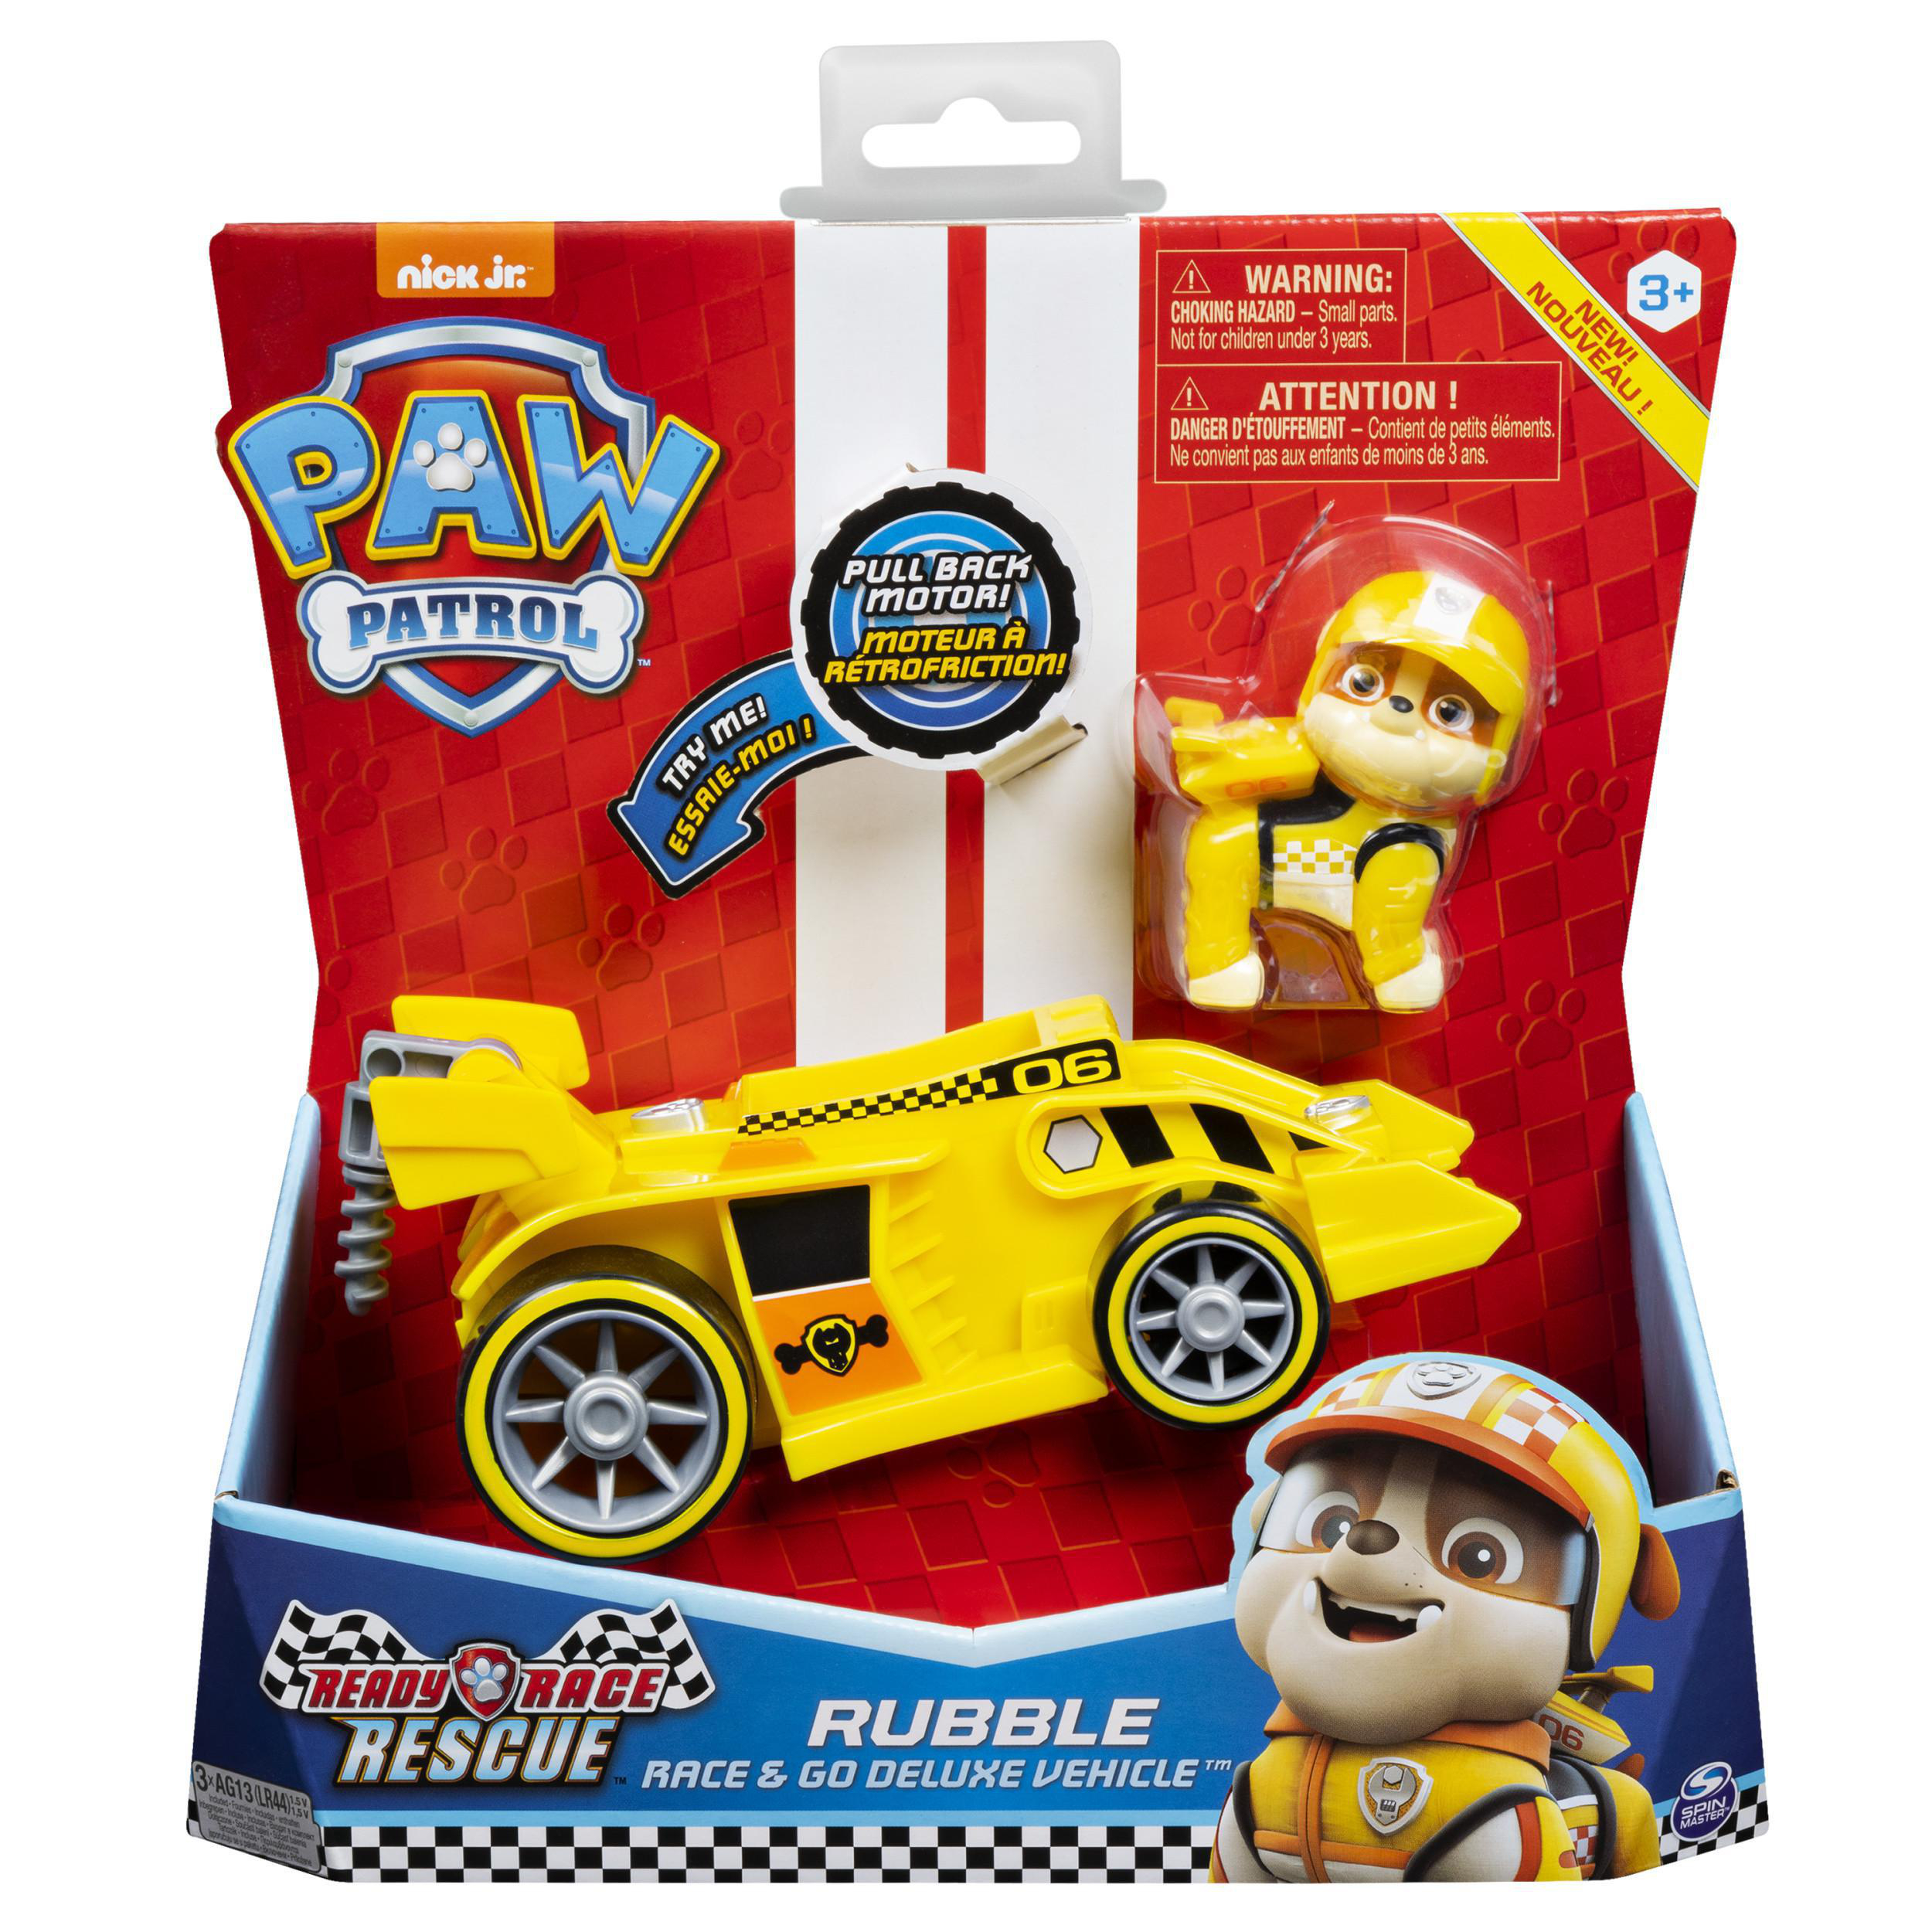 Ready, Race, Rubble SPIN Themed Rescue Vehicle Mehrfarbig Spielset Patrol MASTER Paw